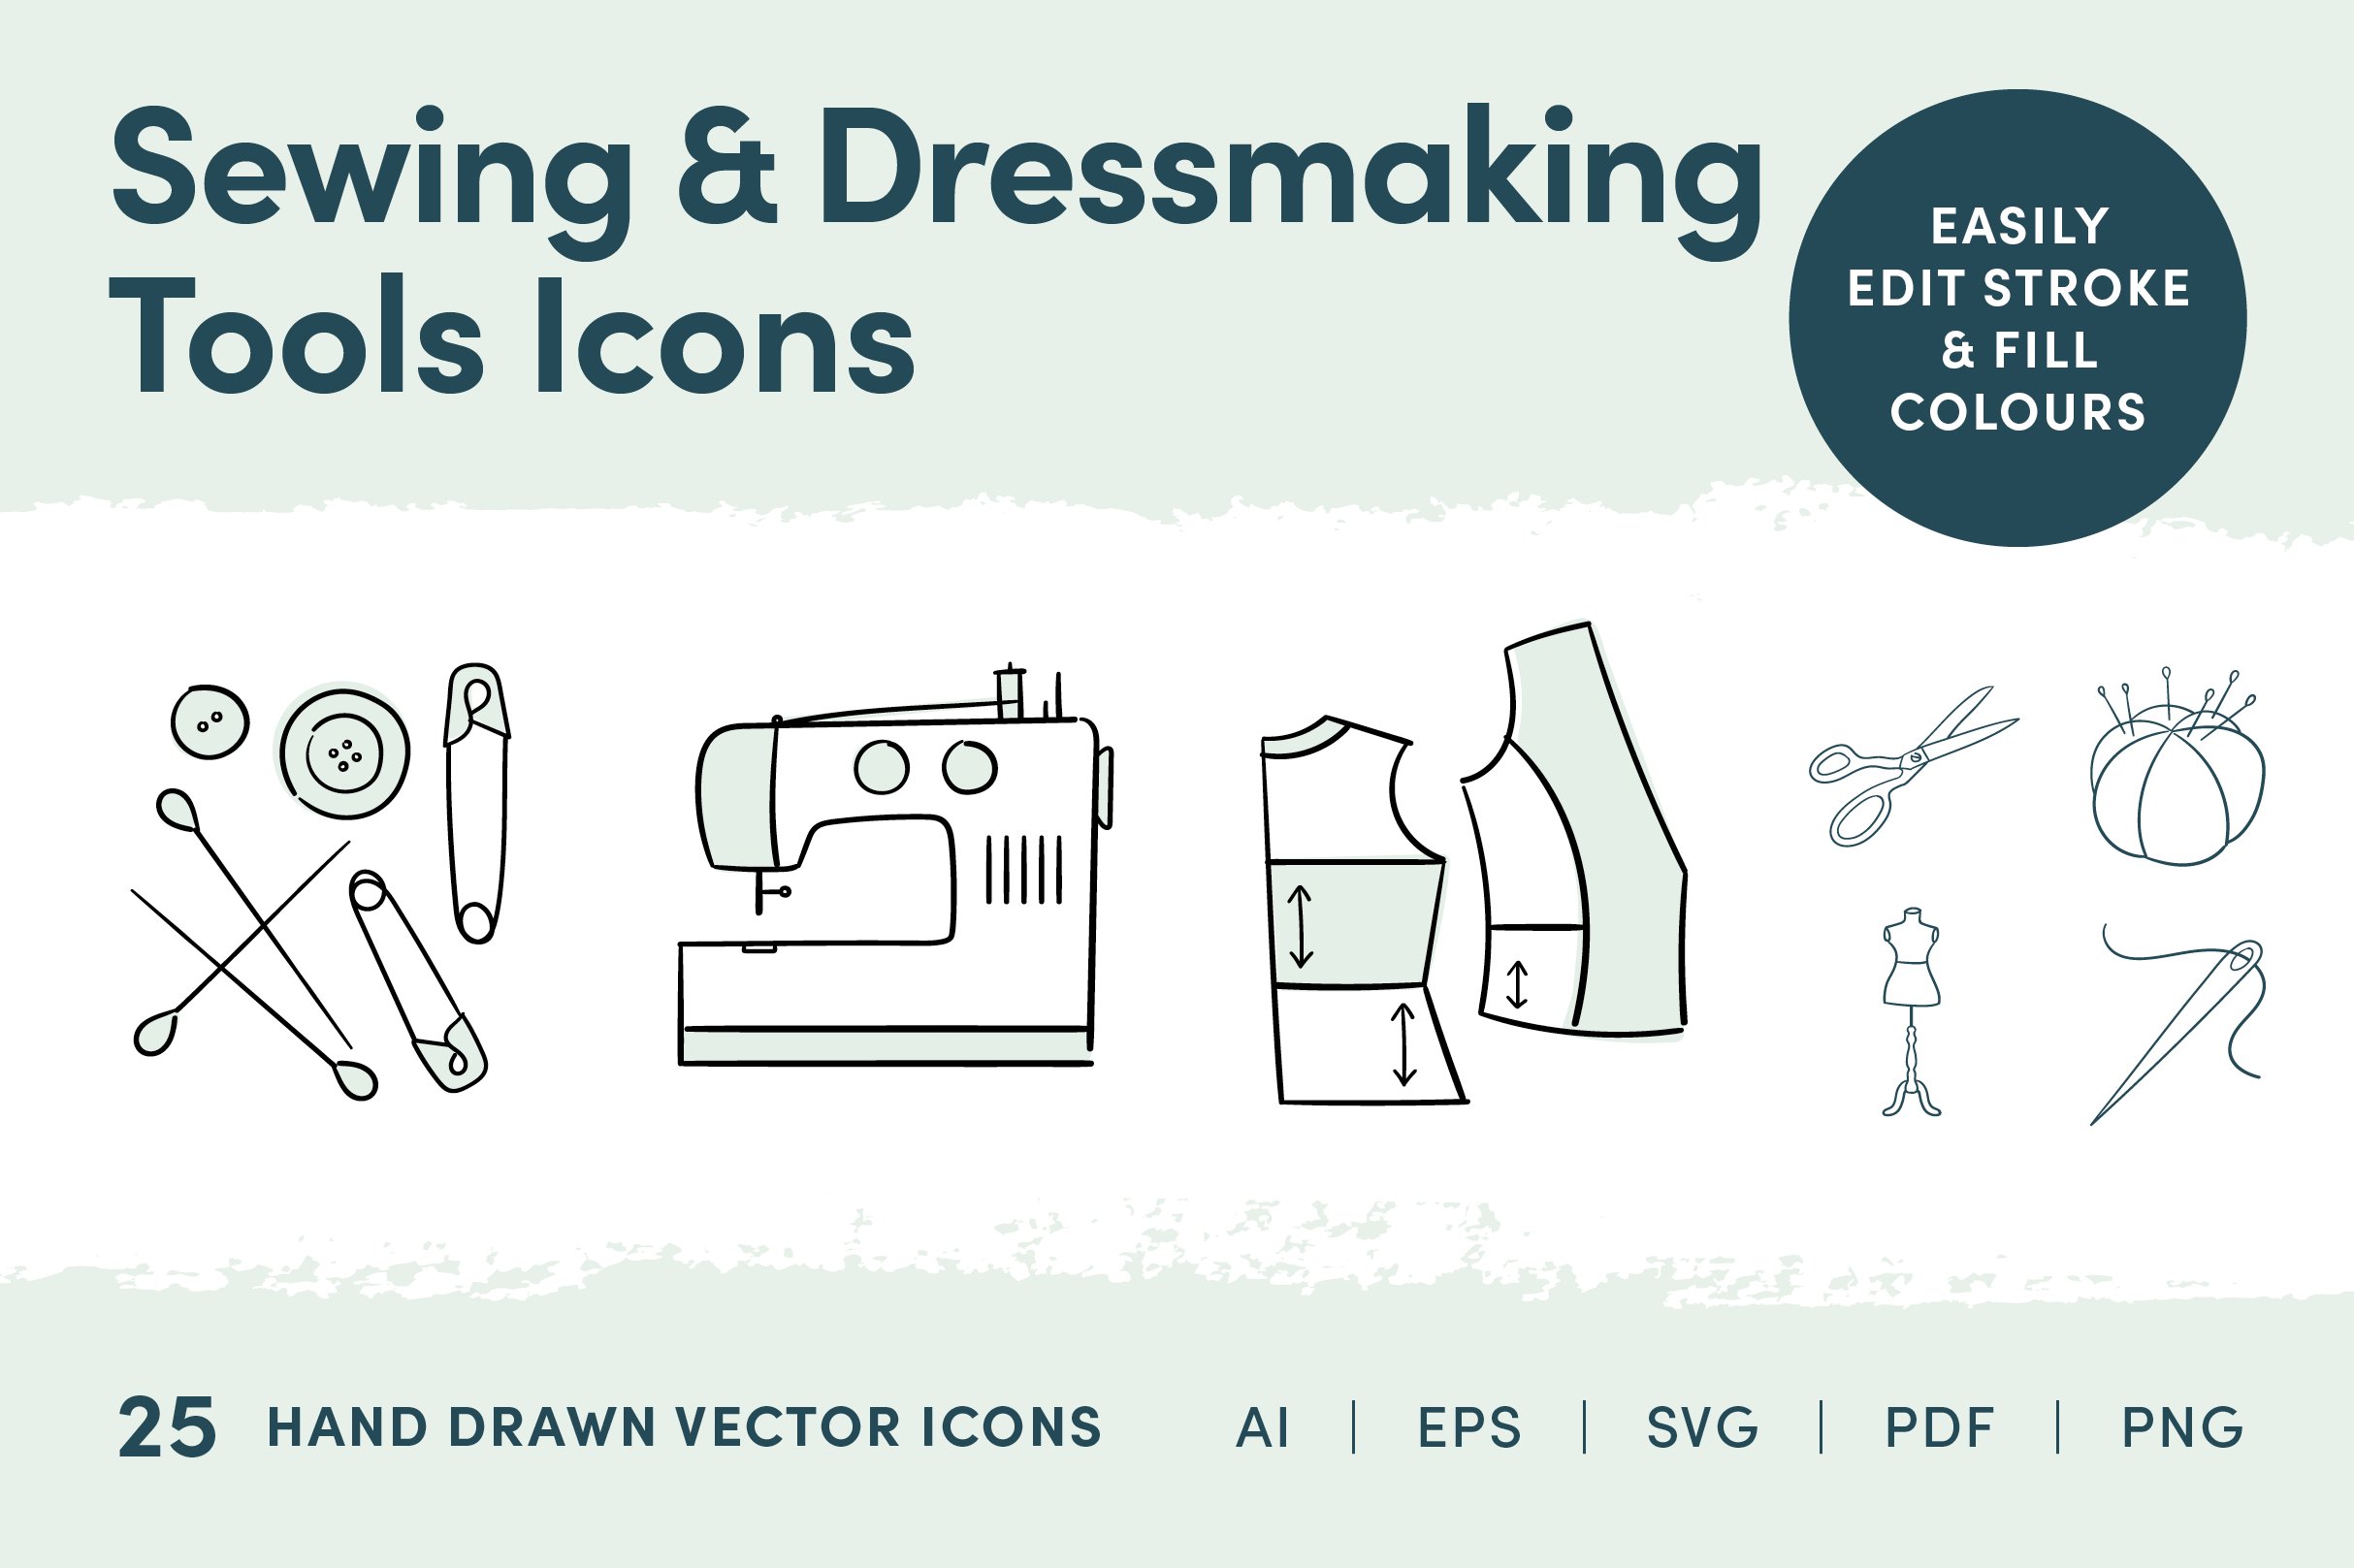 Sewing & Dressmaking Tools Icons cover image.